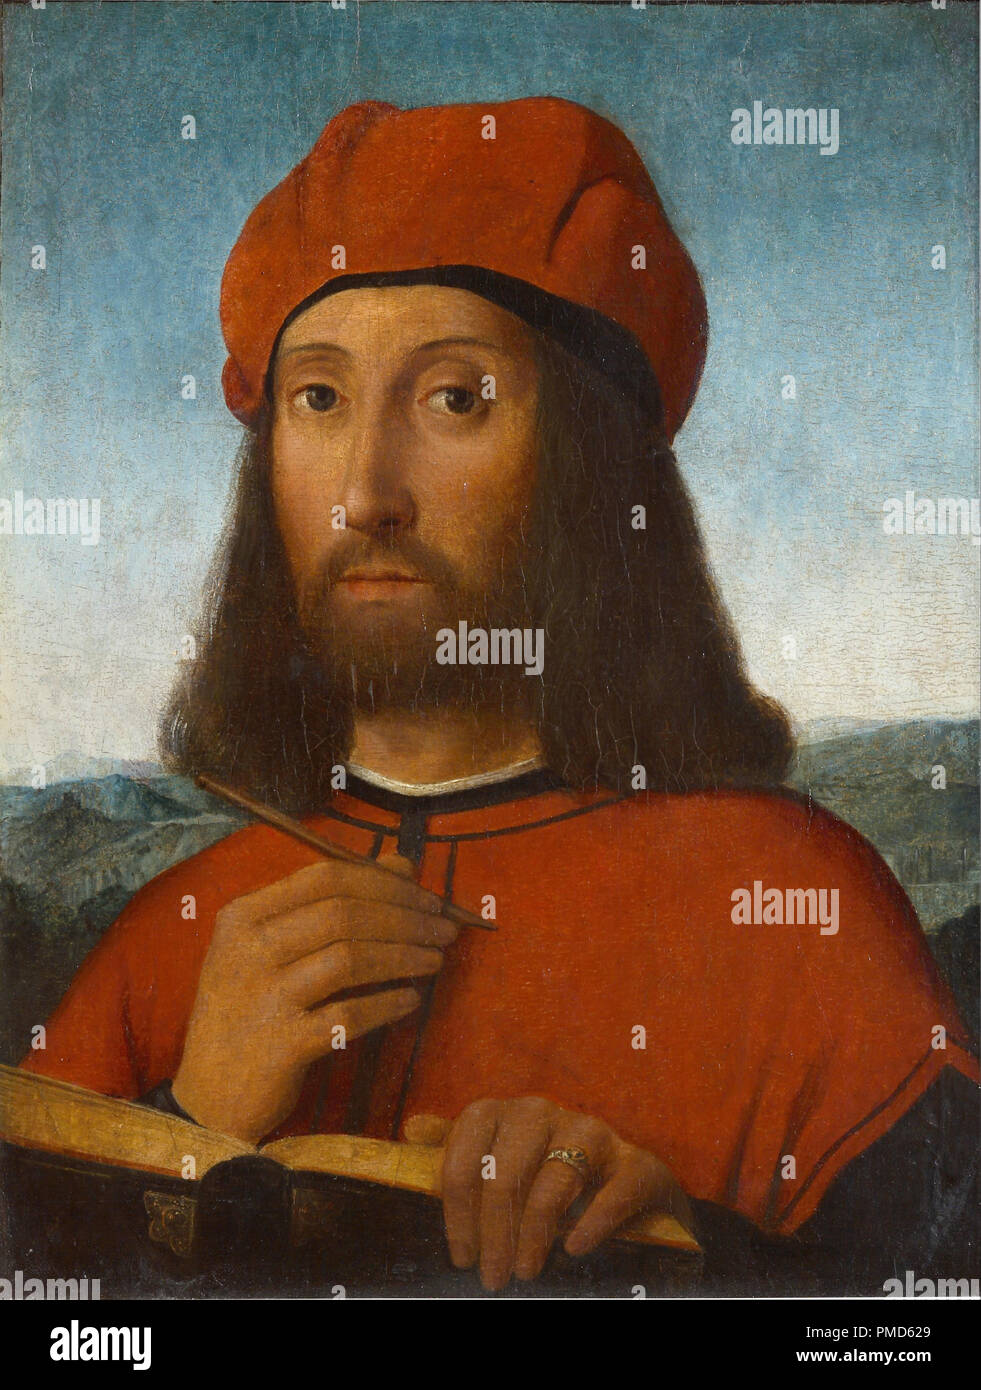 Portrait of a Man with Red Beret and Book. Date/Period: 1480s - 1490s. Painting. Height: 300 mm (11.81 in); Width: 230 mm (9.05 in). Author: ANTONELLO DE SALIBA. ANTONELLO DA SALIBA. Stock Photo